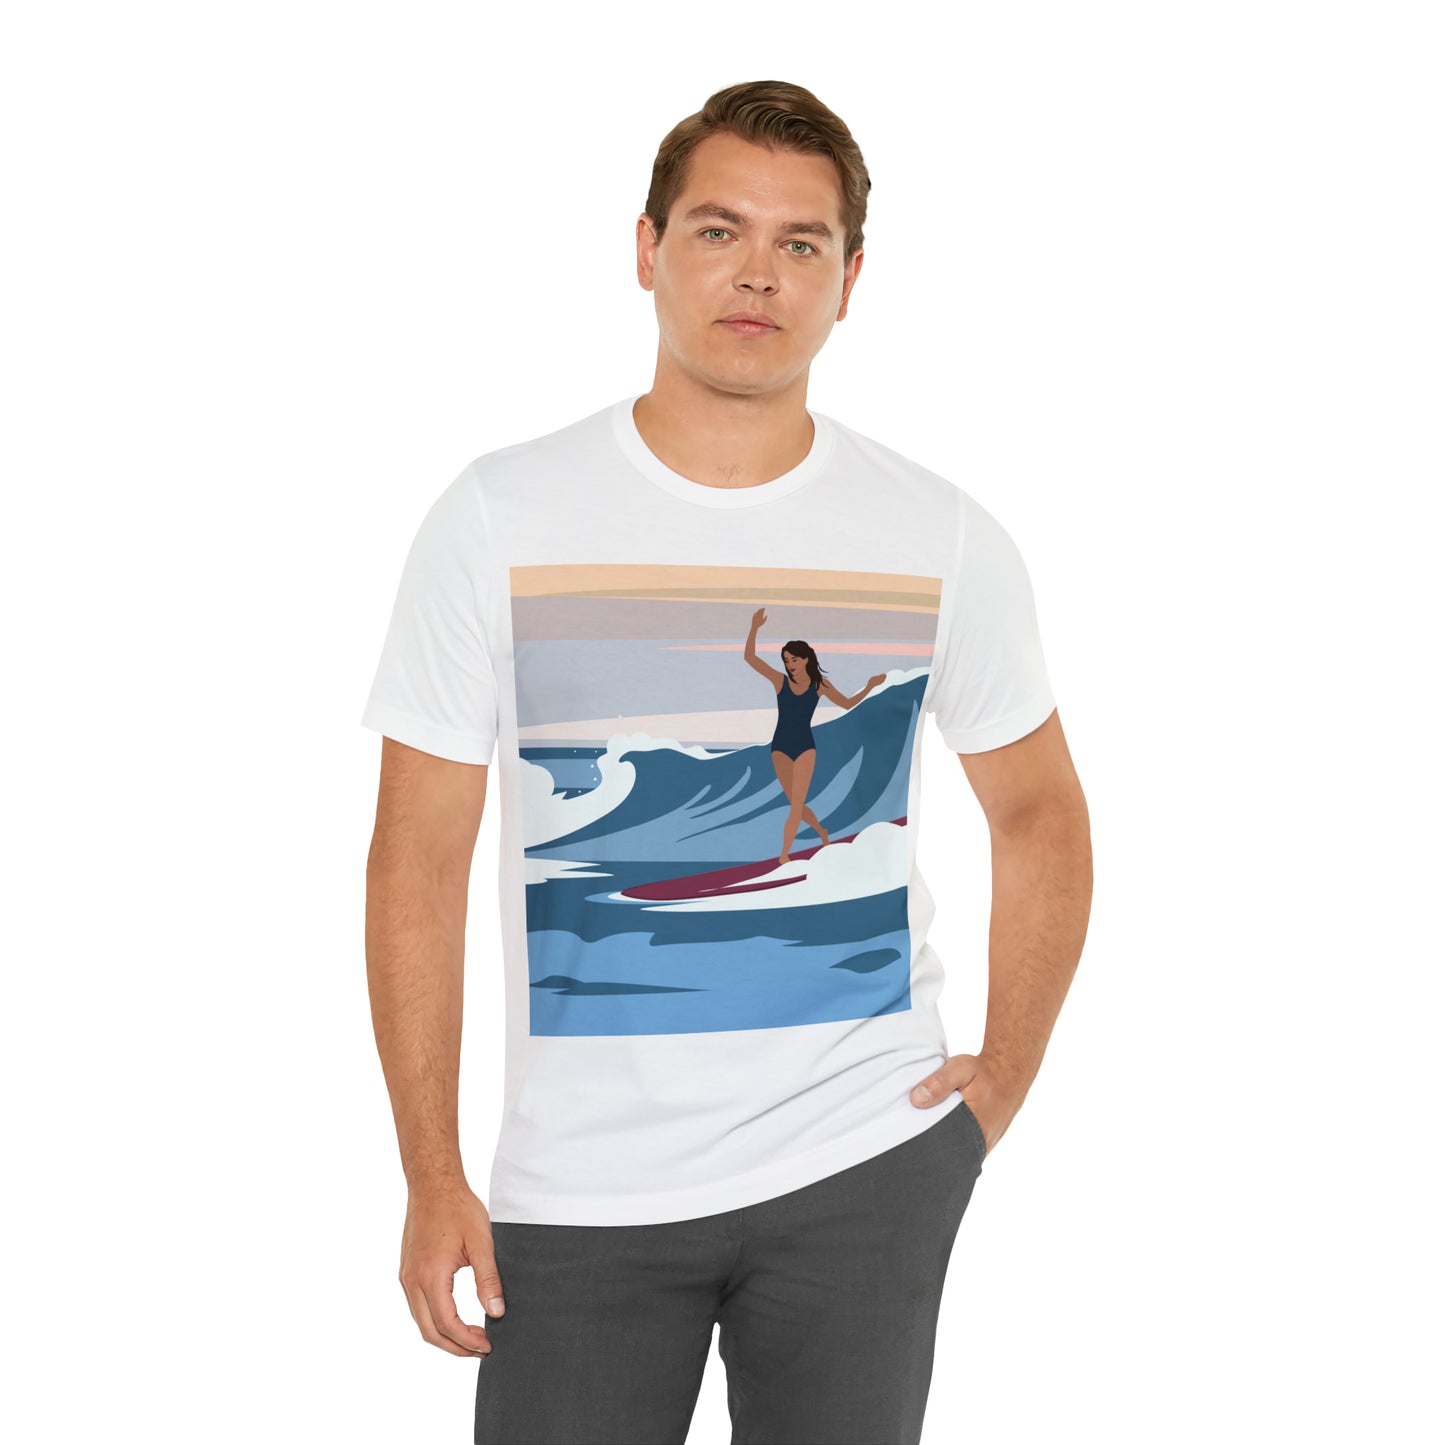 Serenity by the Sea Woman Surfing Art Unisex Jersey Short Sleeve T-Shirt